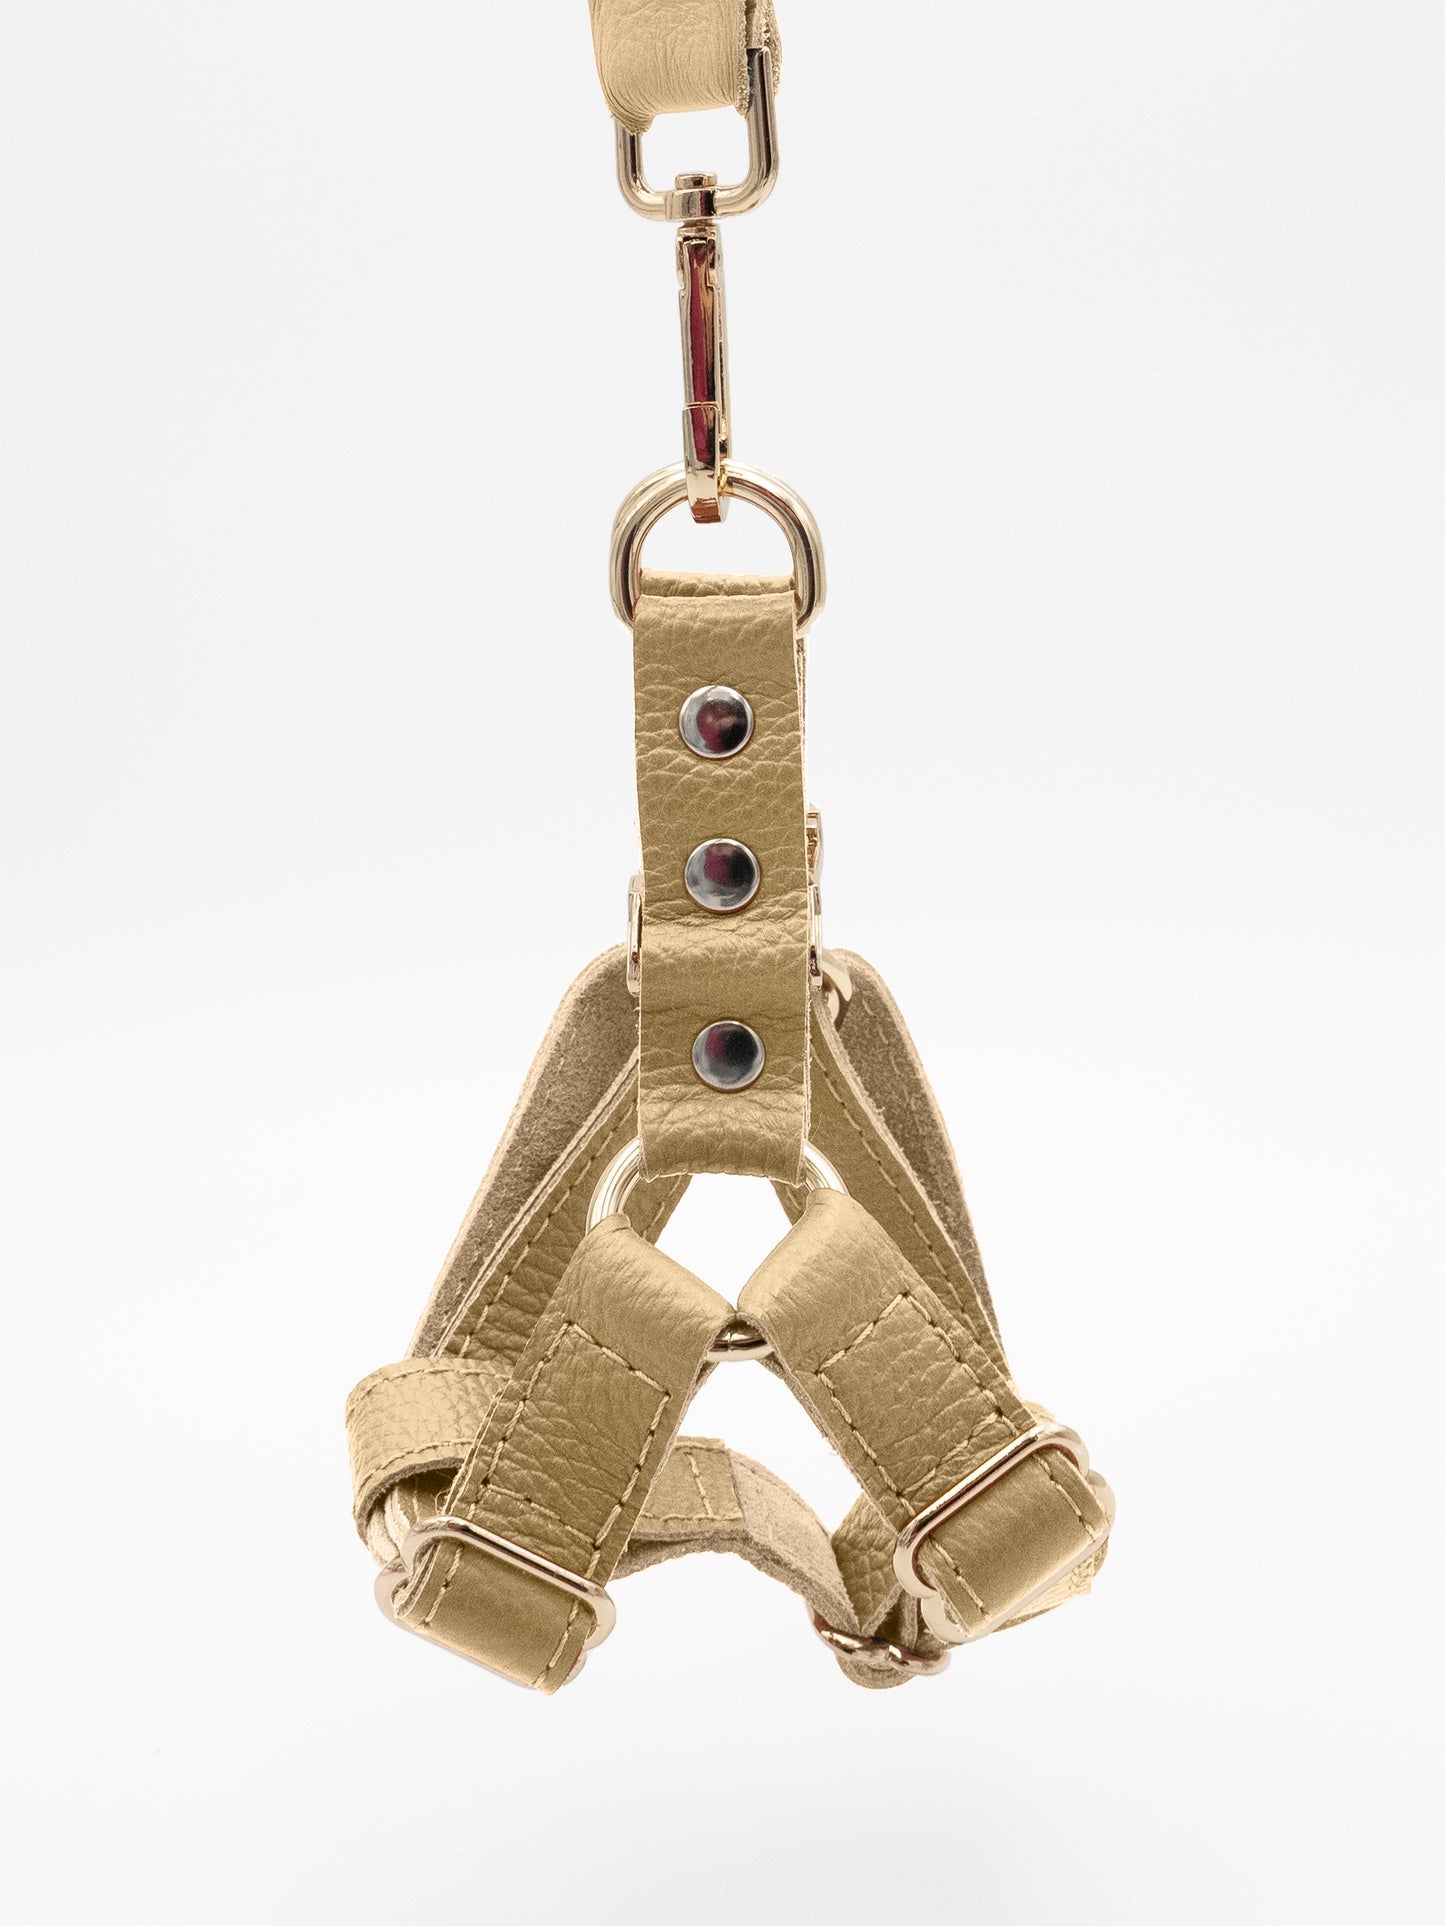 The Sand Harness